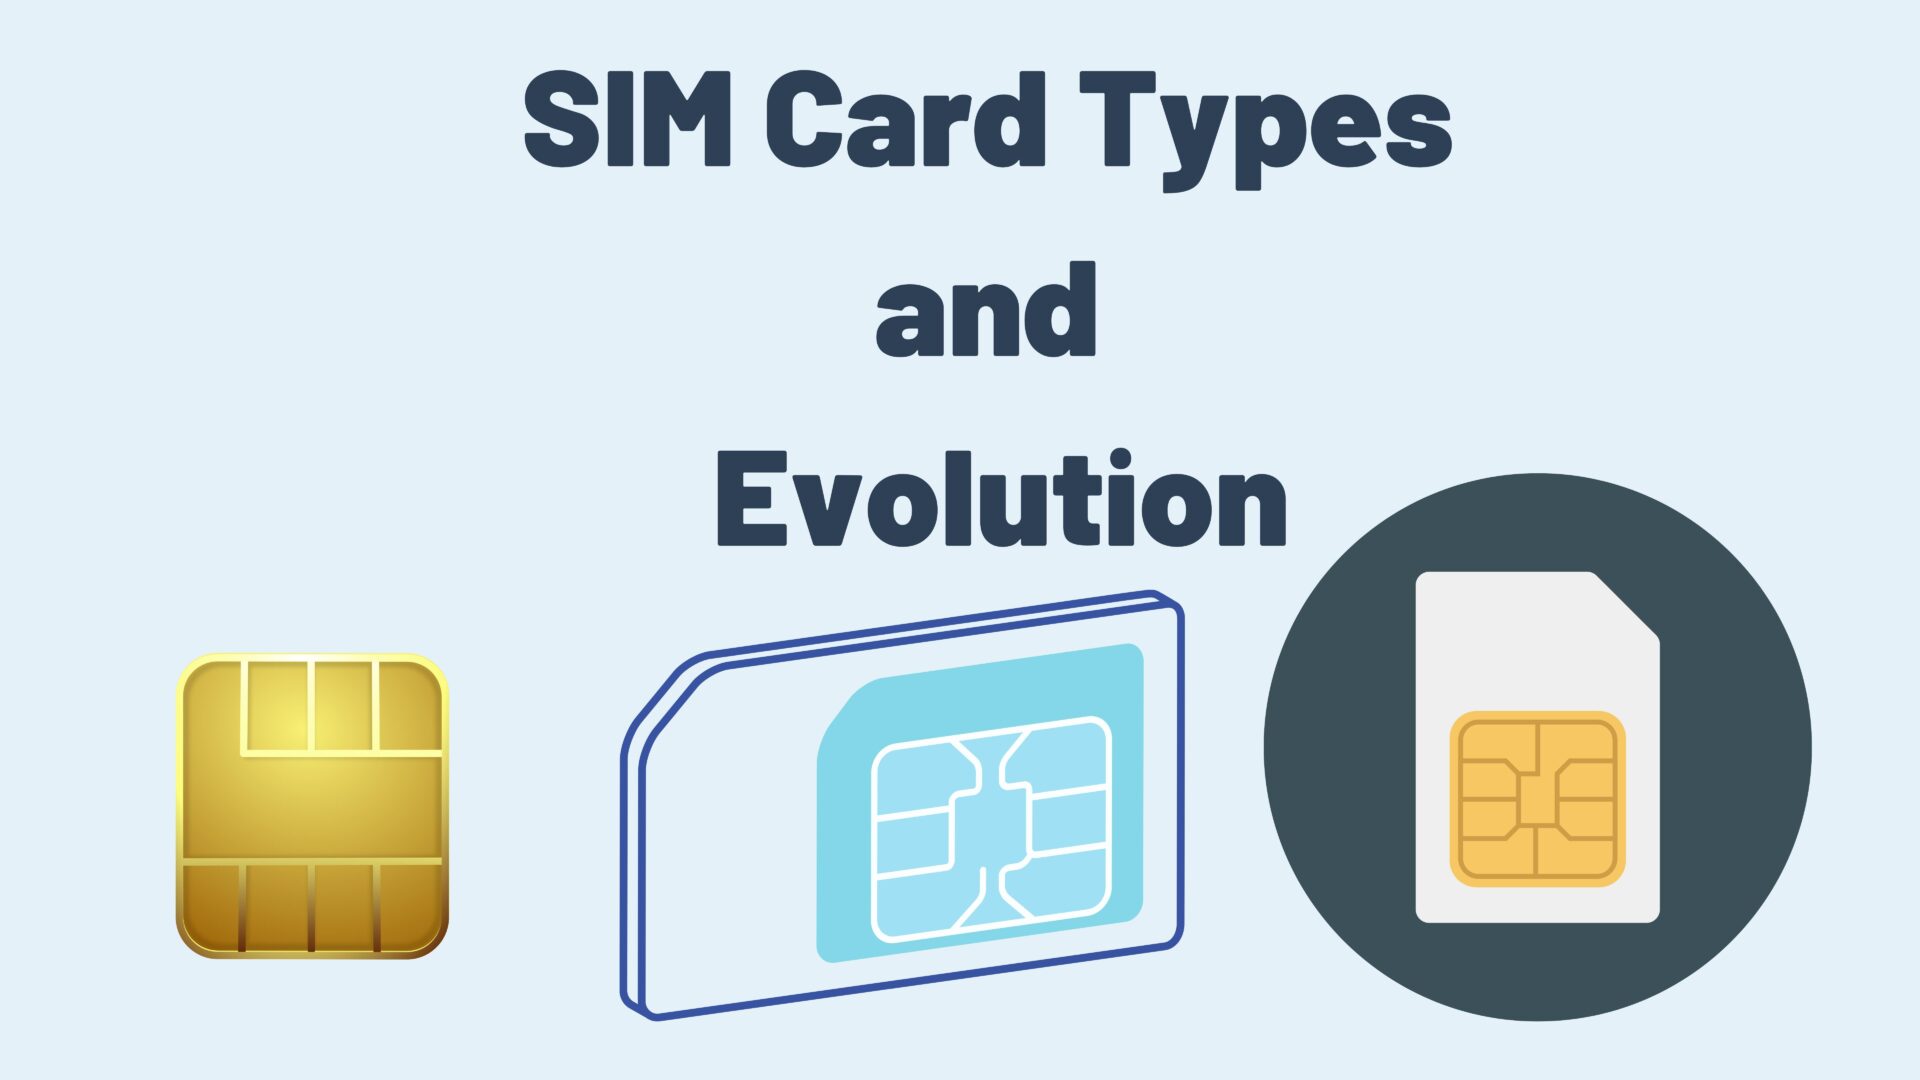 SIM Card Types and Evolution